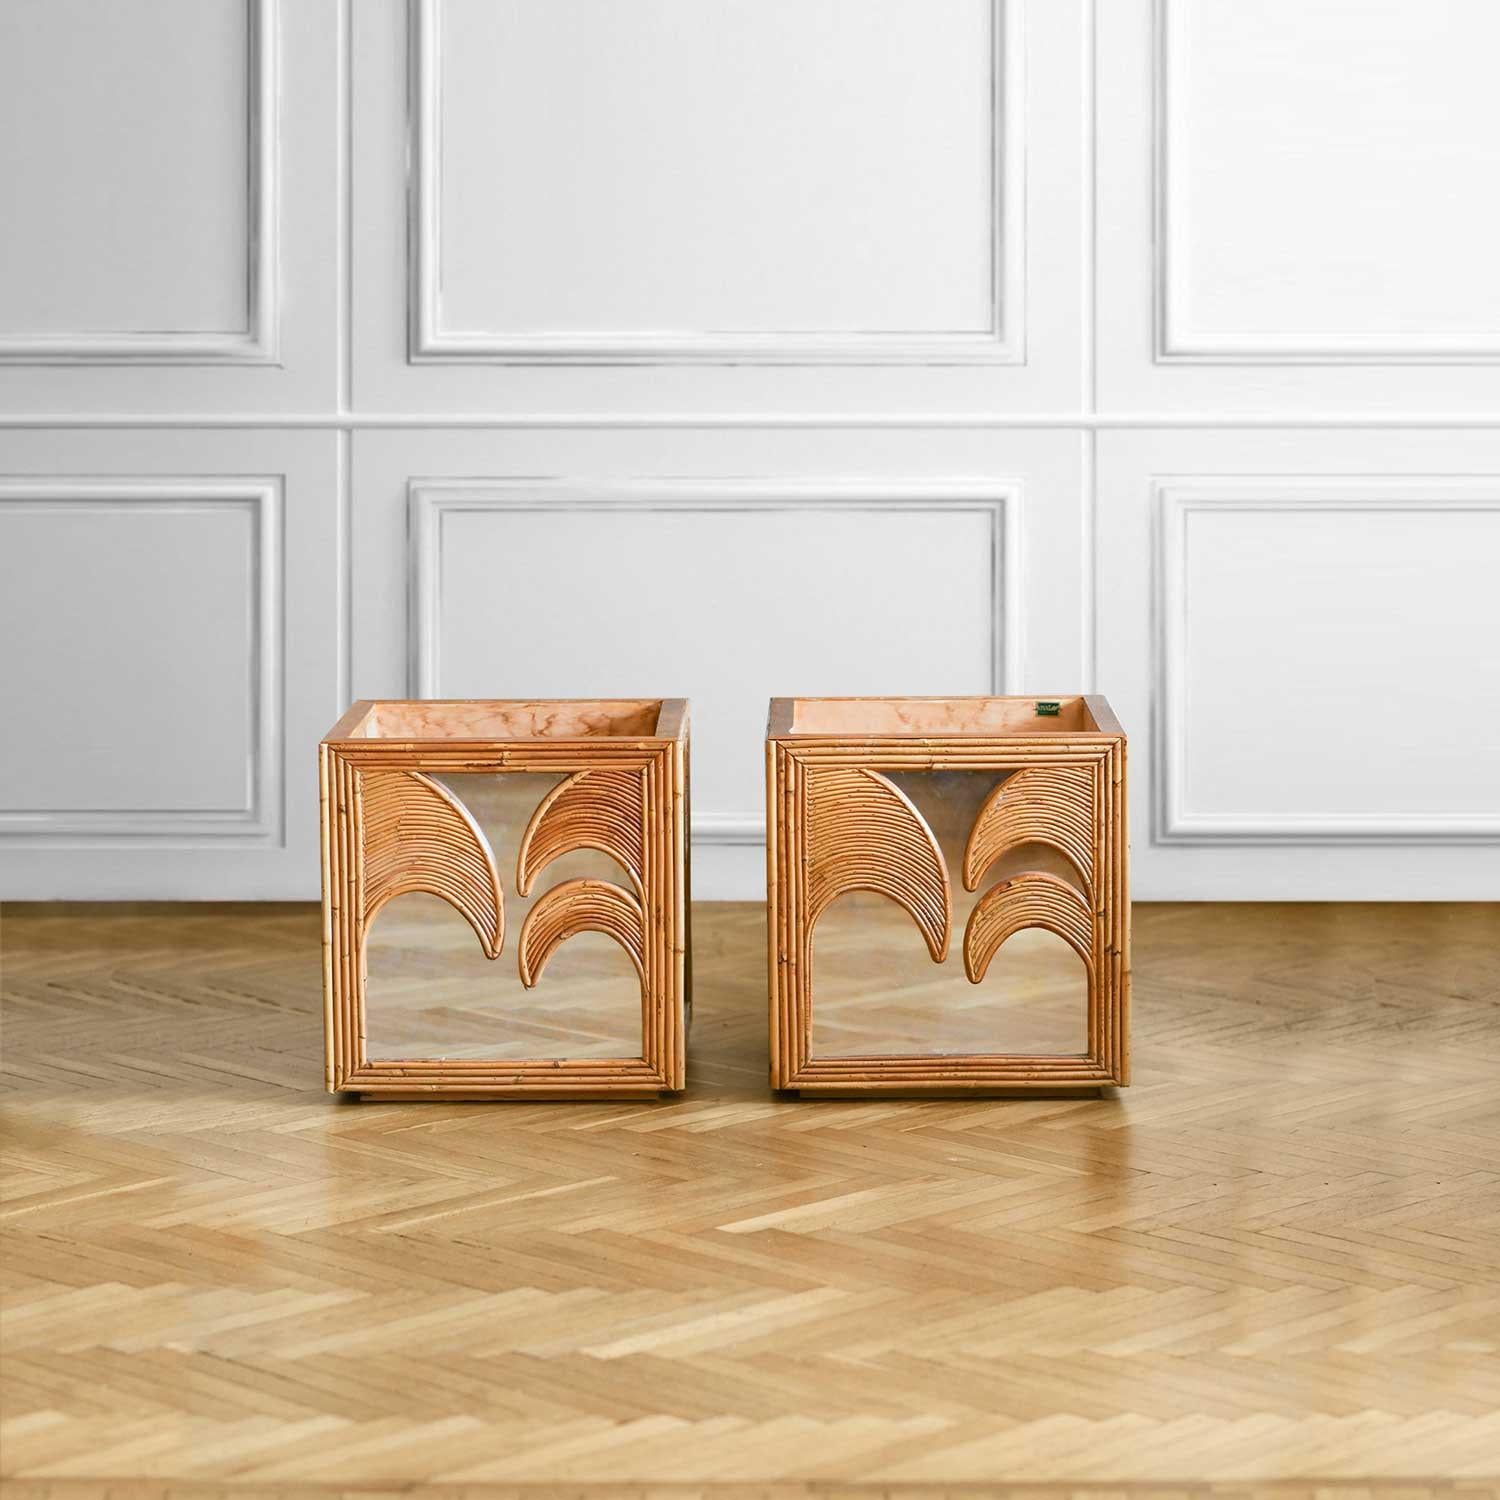 Pair of “Vivai del Sud” planters, 1970
Product details
Materials: bamboo and mirrored glass.
Dimensions 51 W x 53 H x 51 D cm
Production: Vivai del sud, Italy, 1970.